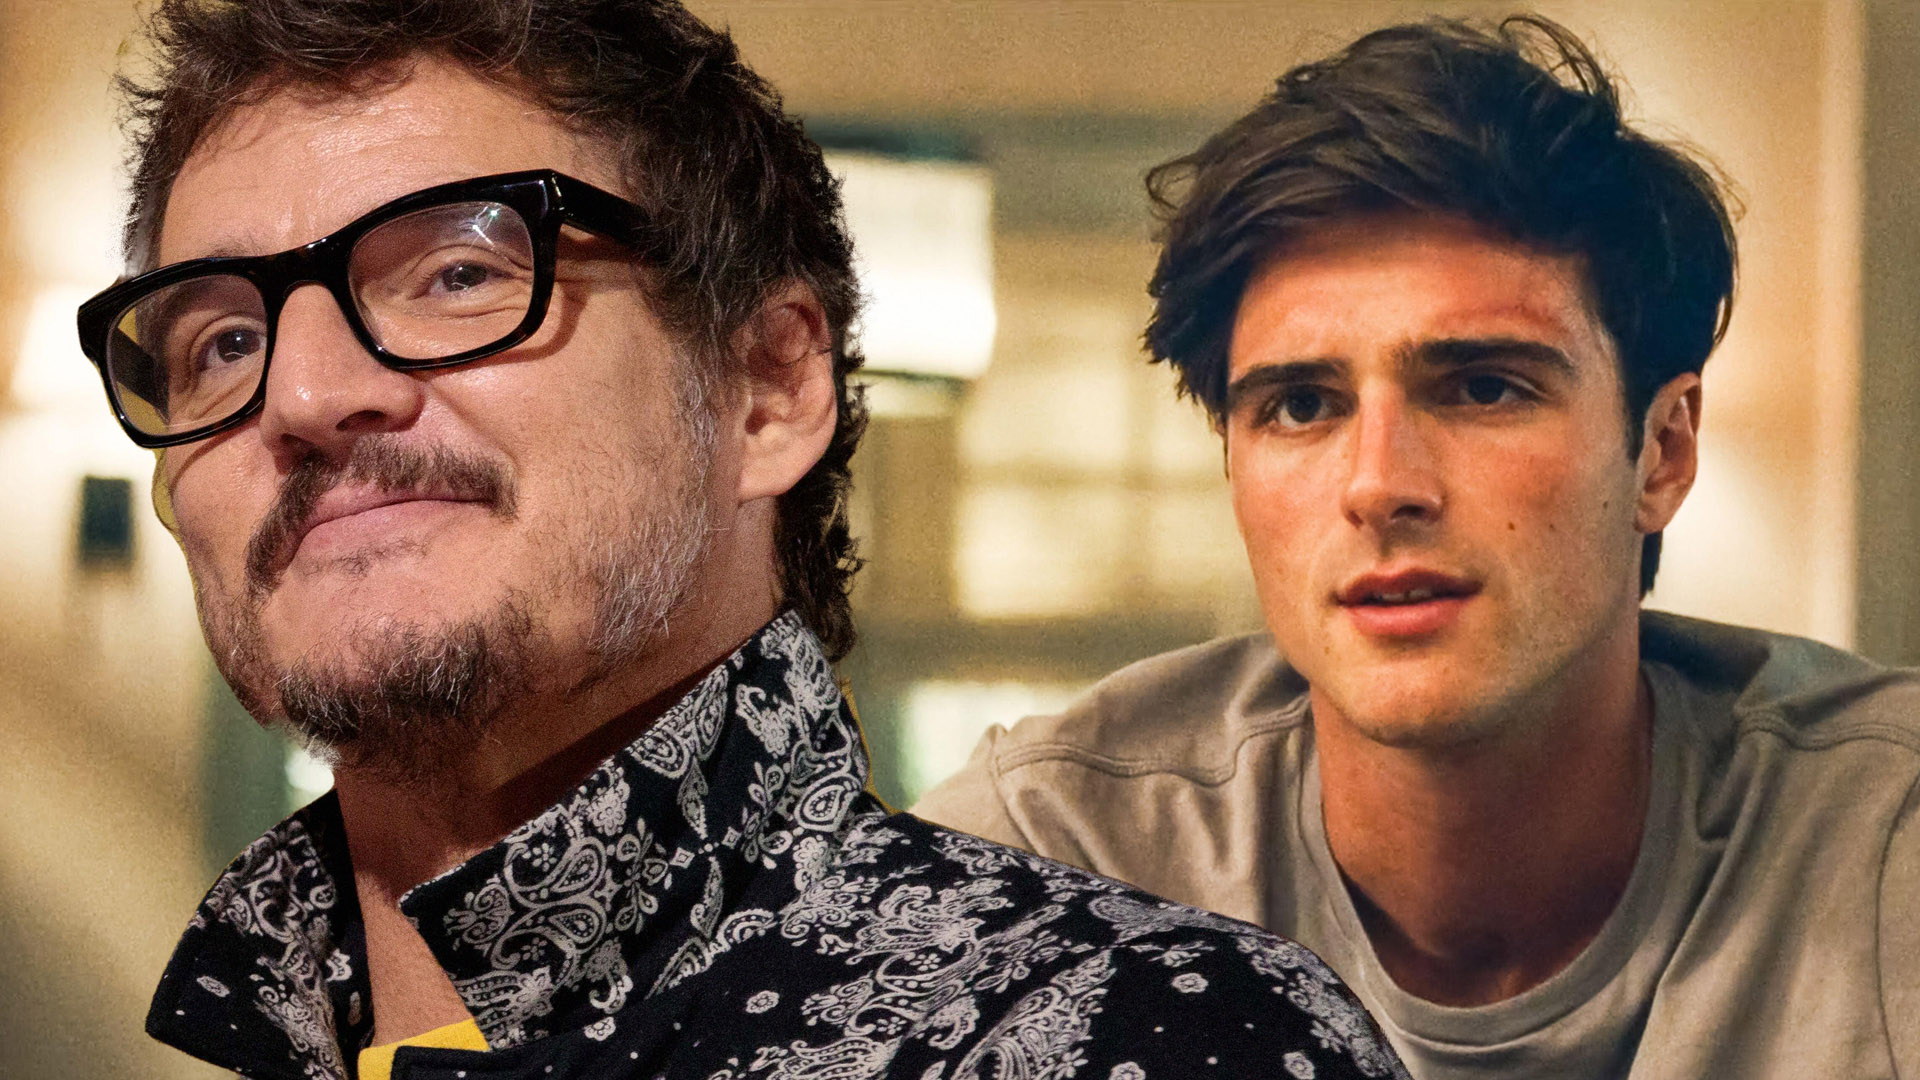 Jacob Elordi Follows Pedro Pascal's Lead in The Best Way Possible